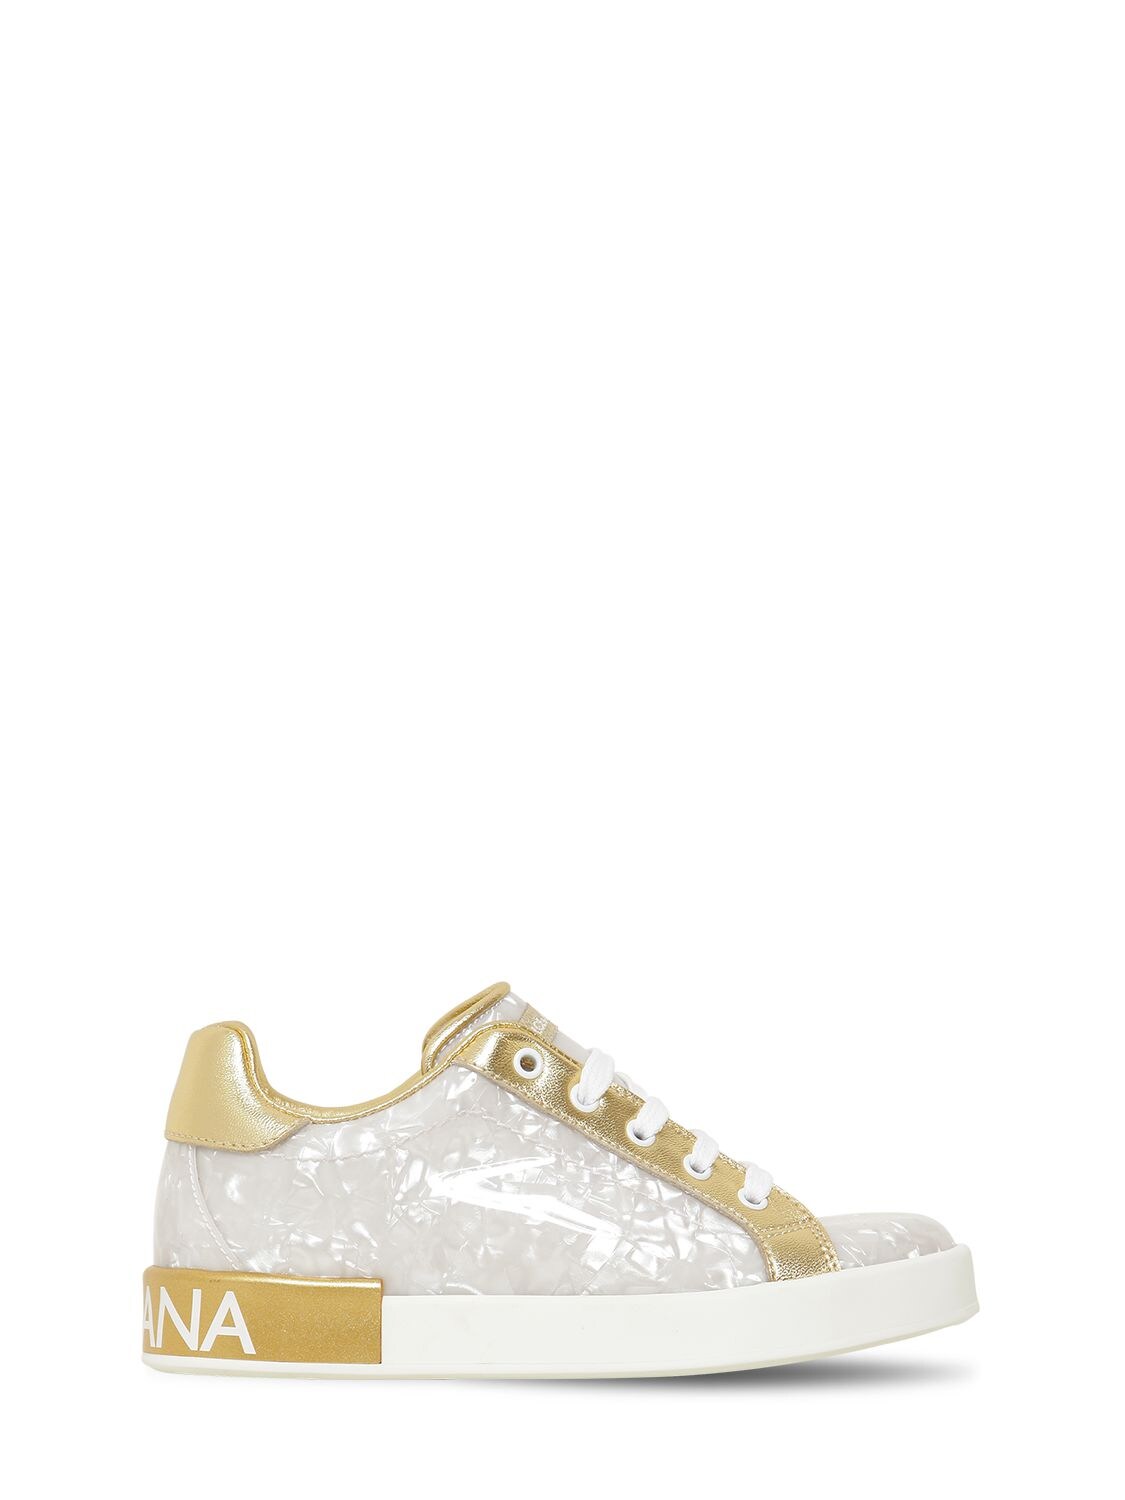 Dolce & Gabbana - Leather lace-up sneakers - White/Gold | Luisaviaroma